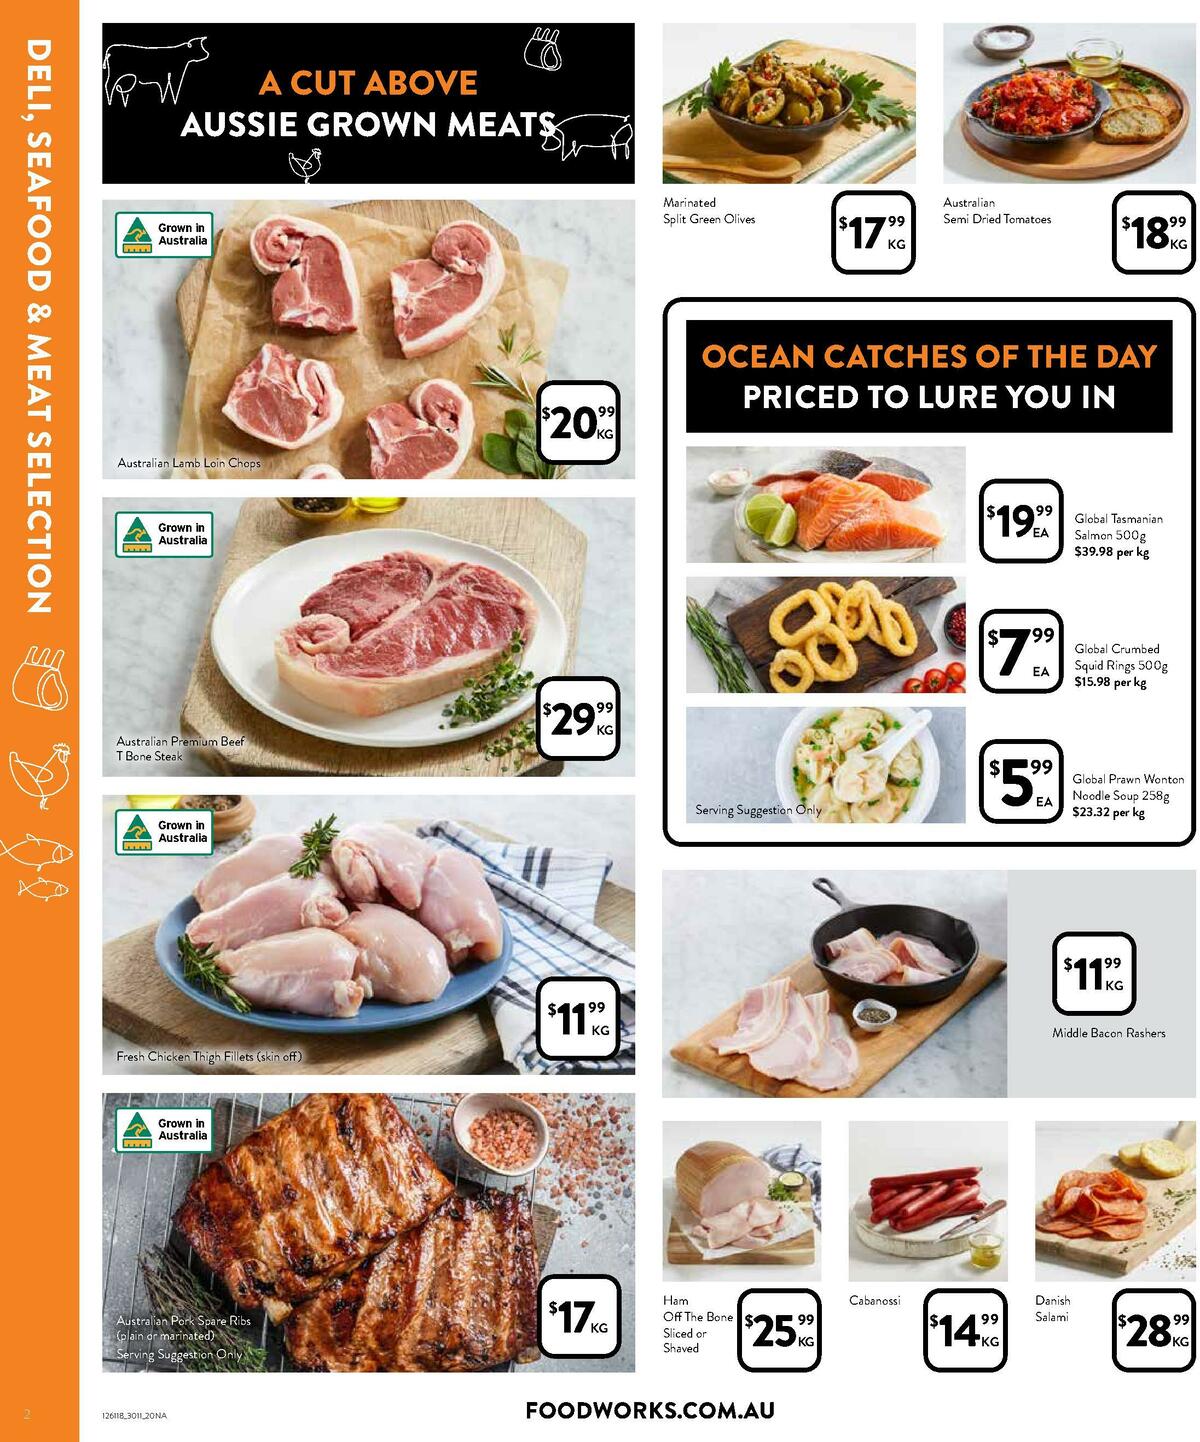 FoodWorks Supermarket Catalogues from 30 November